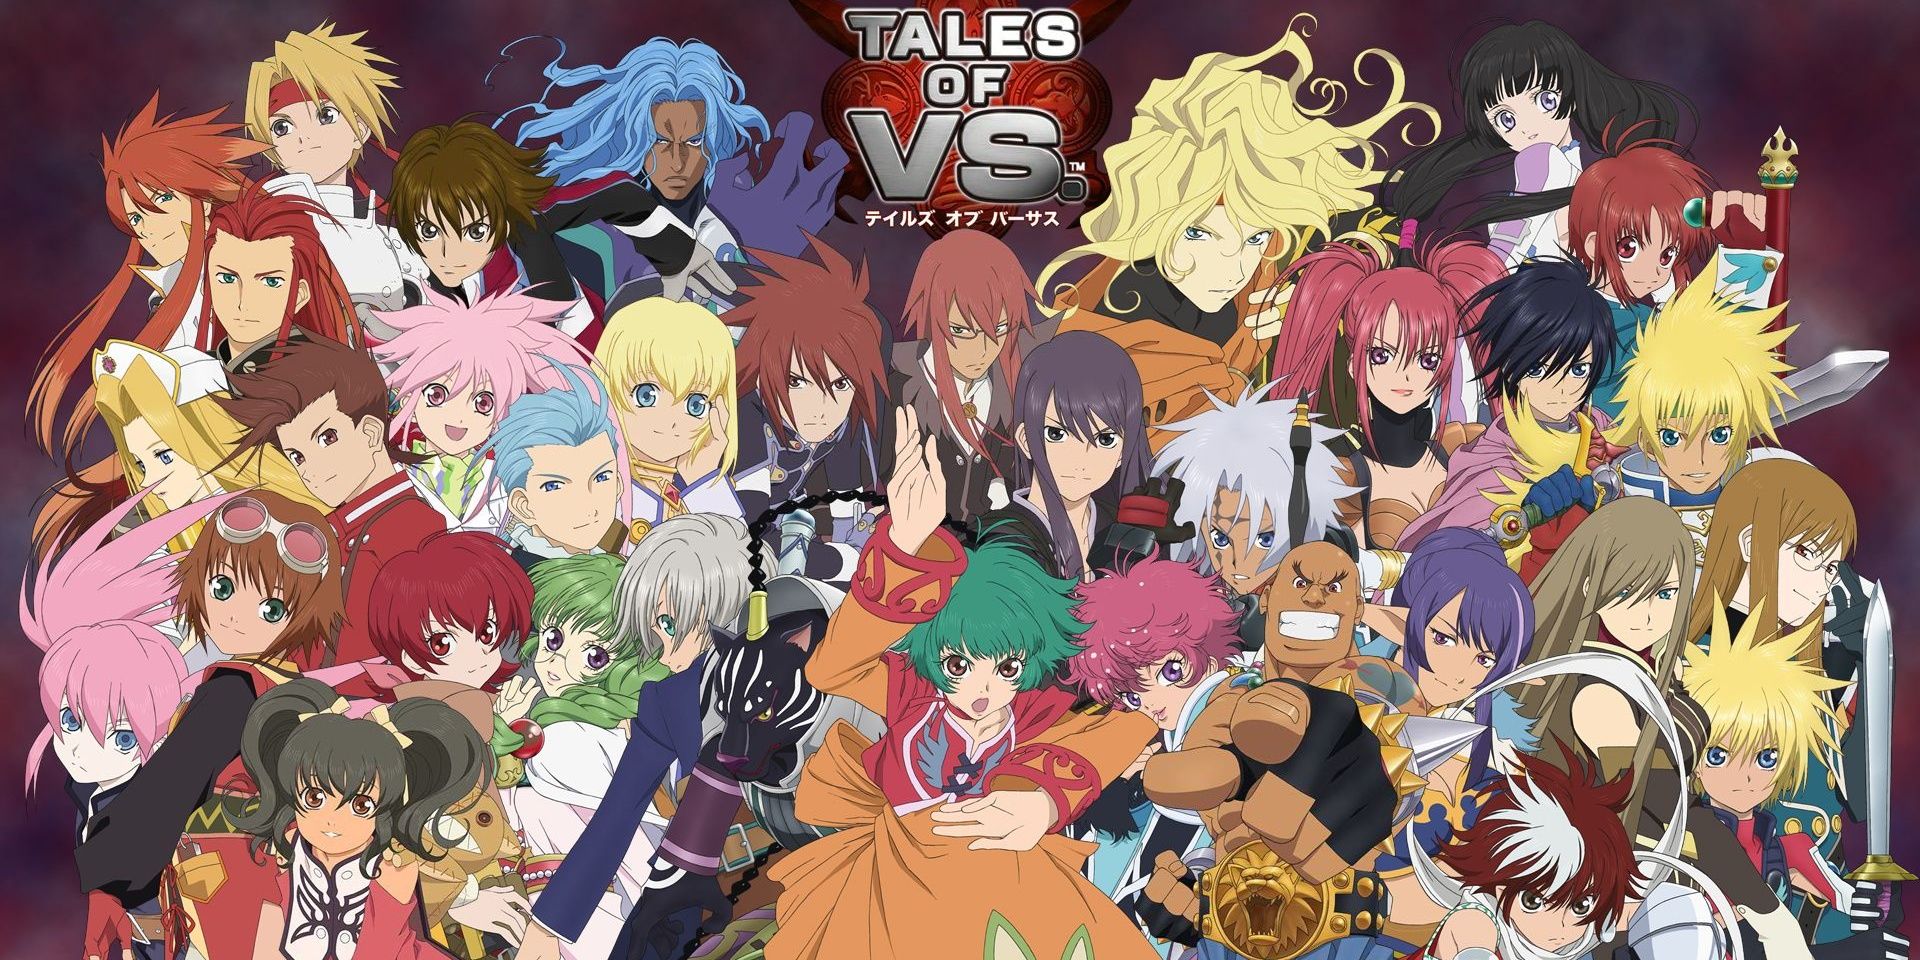 All the heroes and villains who strike their combat positions in Tales of VS.